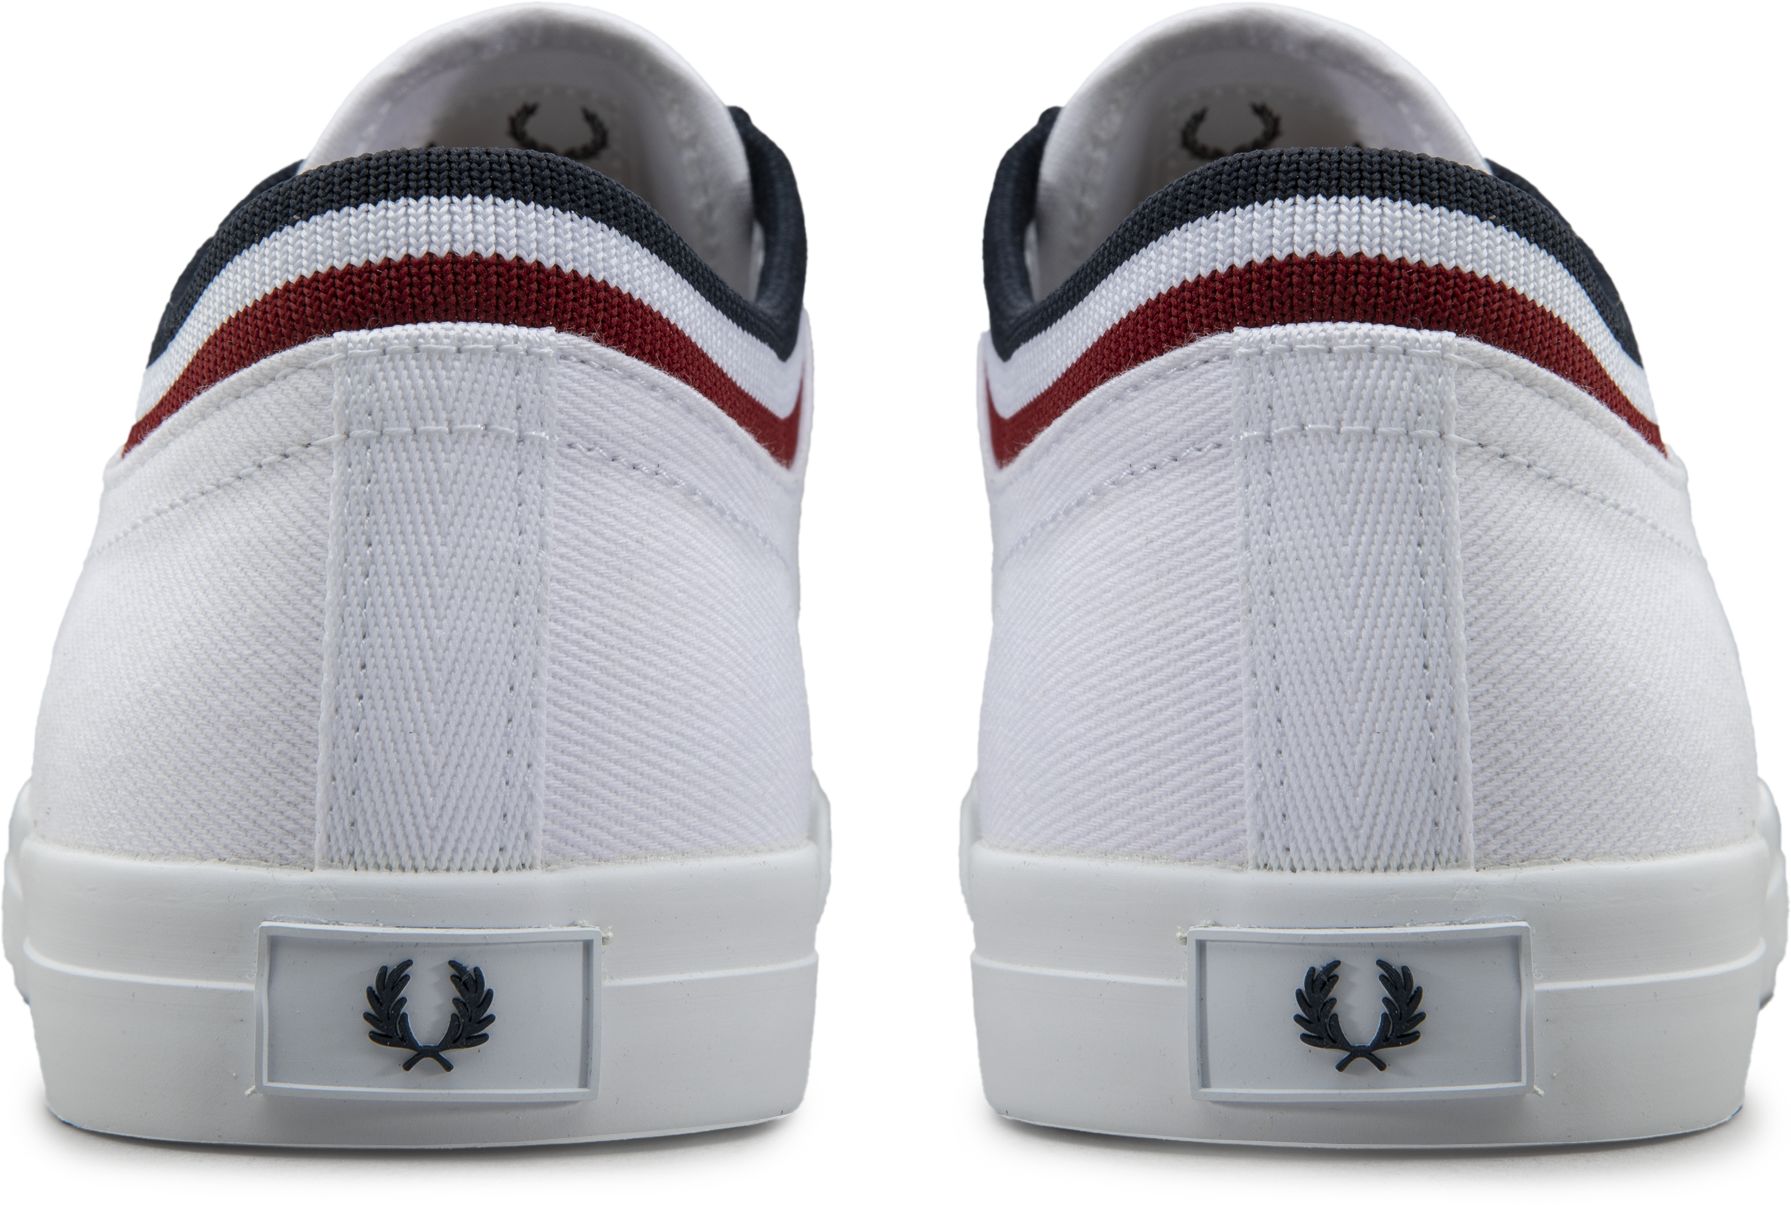 FRED PERRY, M UNDERSPIN TIPPED CUFF TWILL